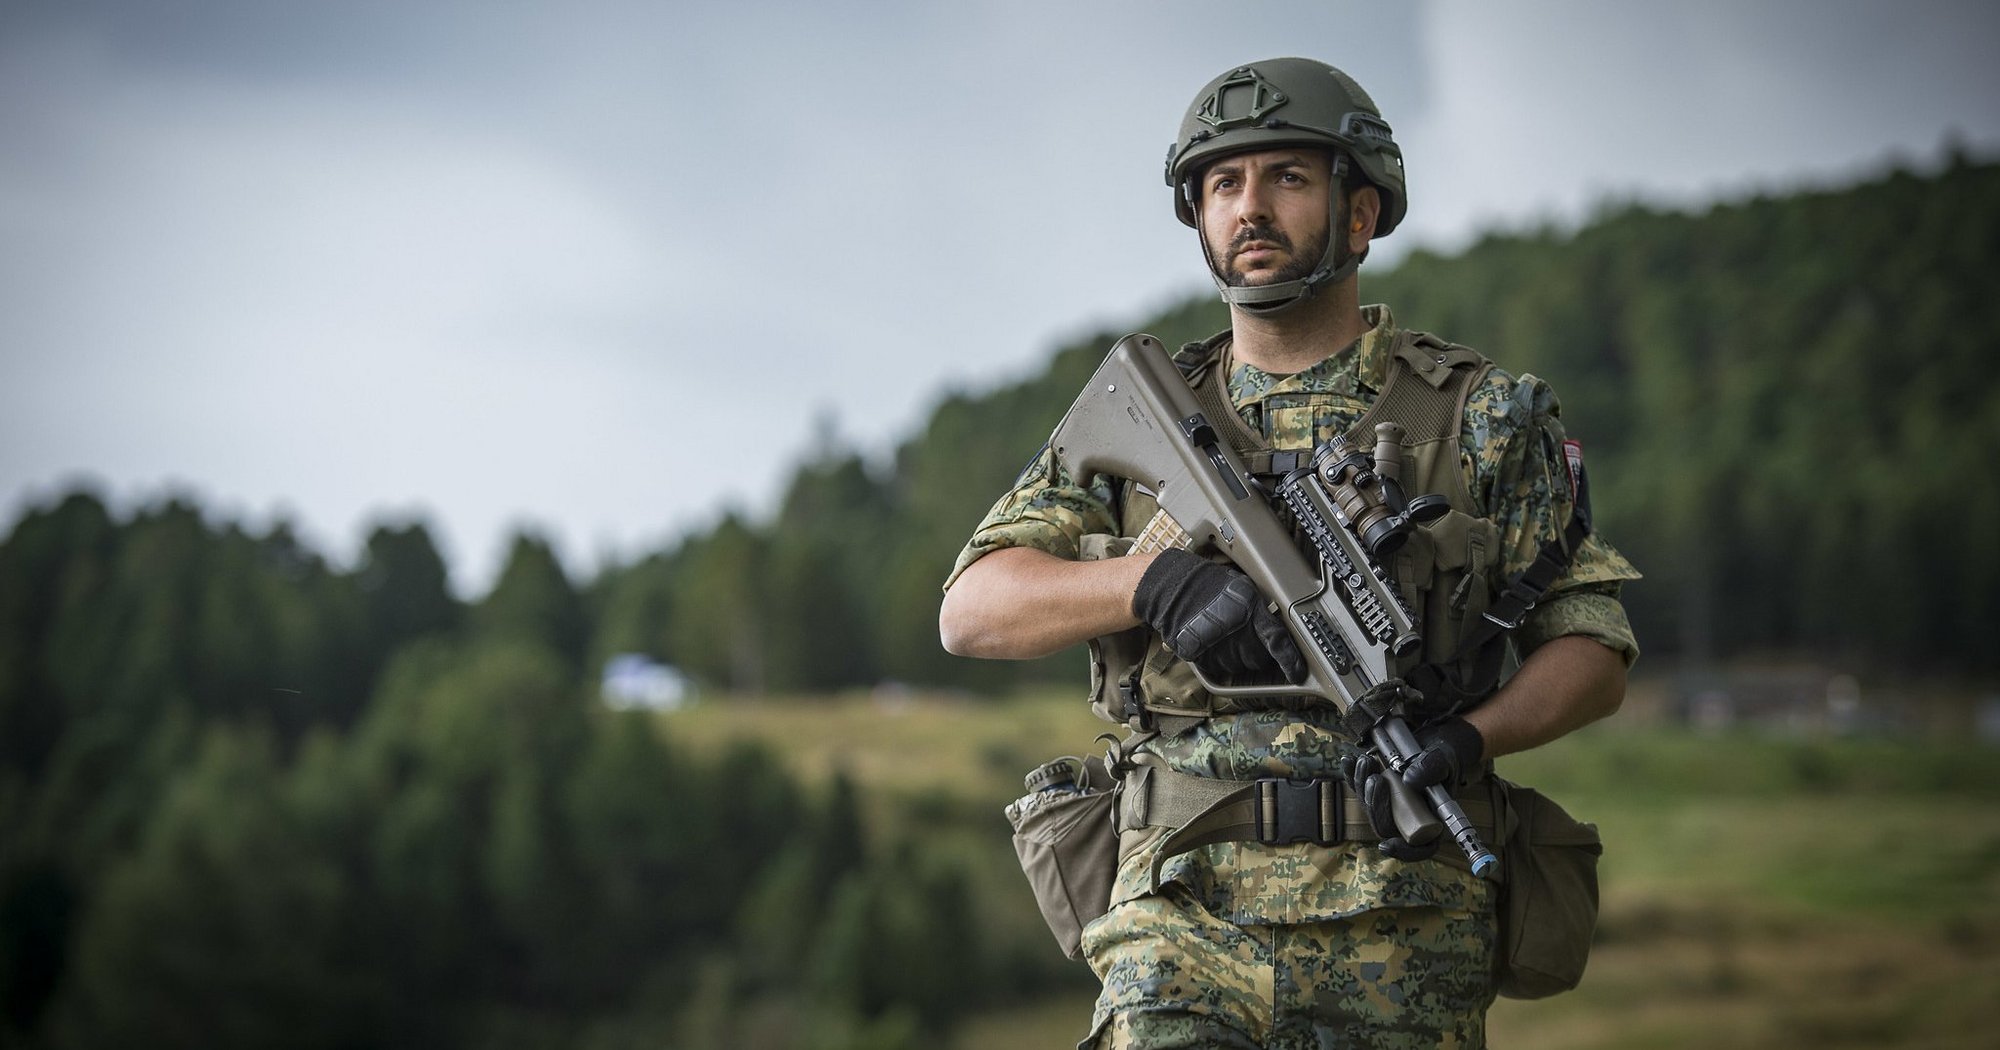 The System Behind the Austrian Armed Forces